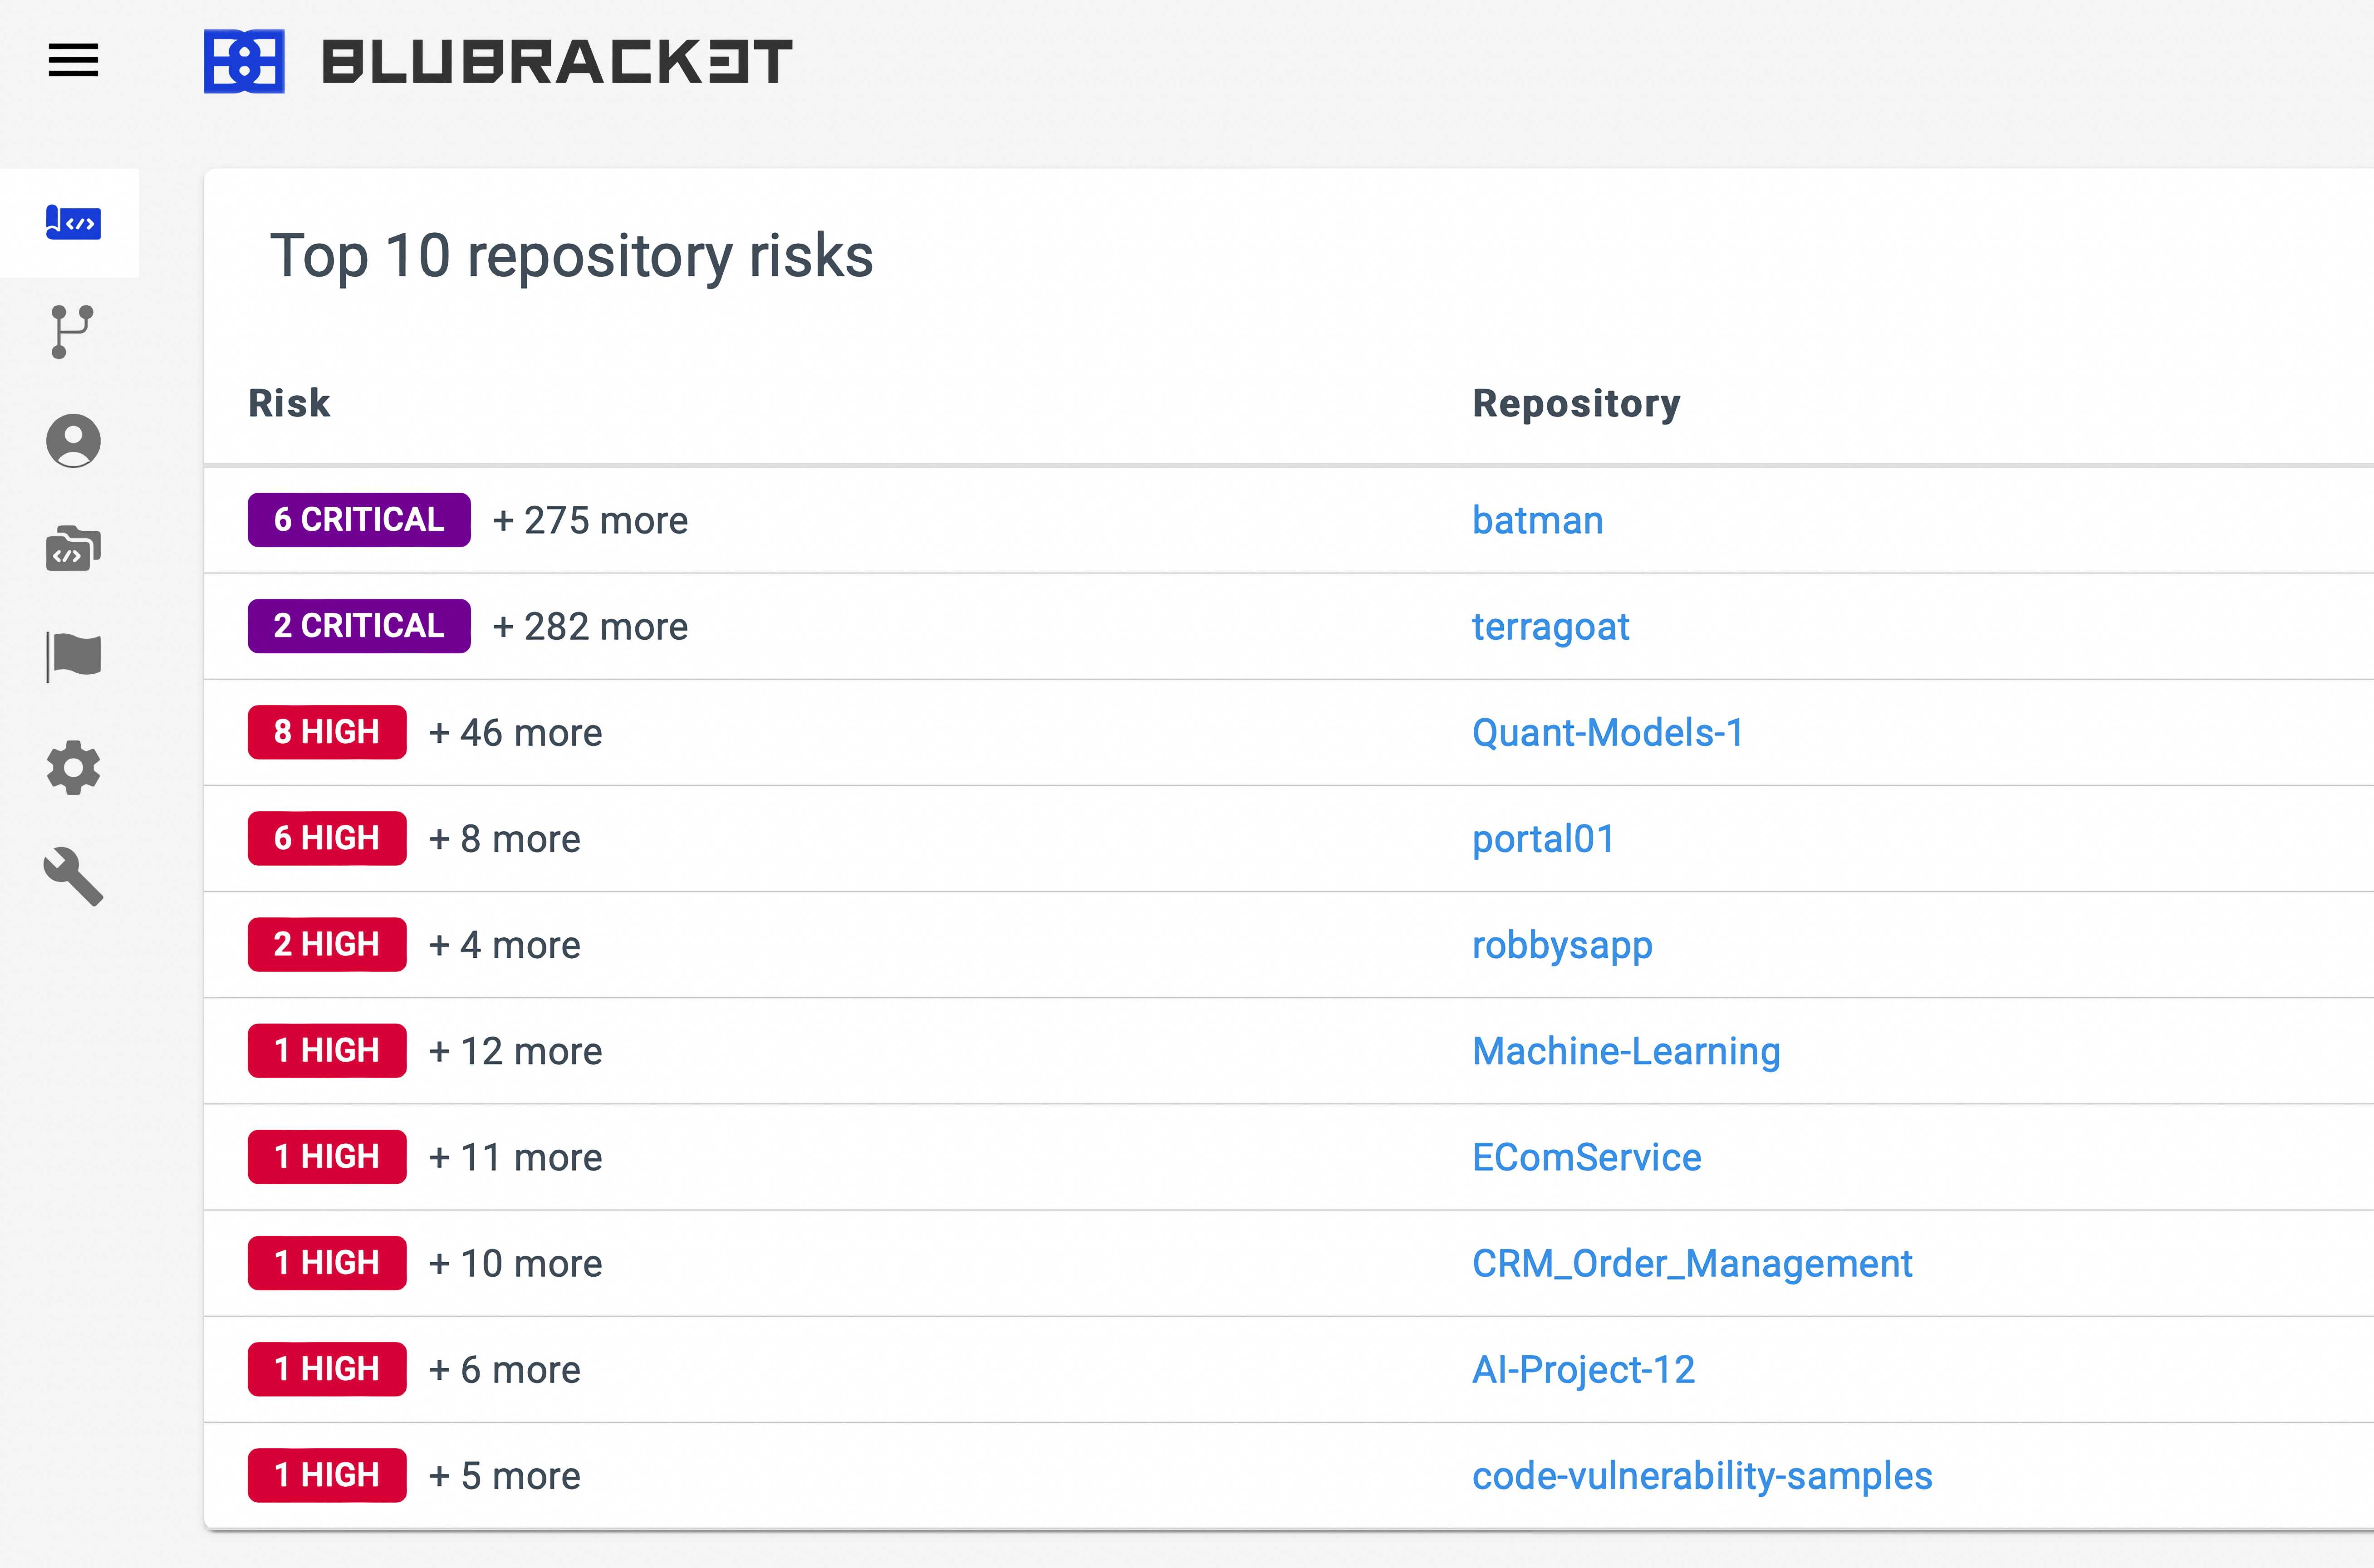 BluBracket scans repositories hosted in GitHub, GitLab, Bitbucket, and others.